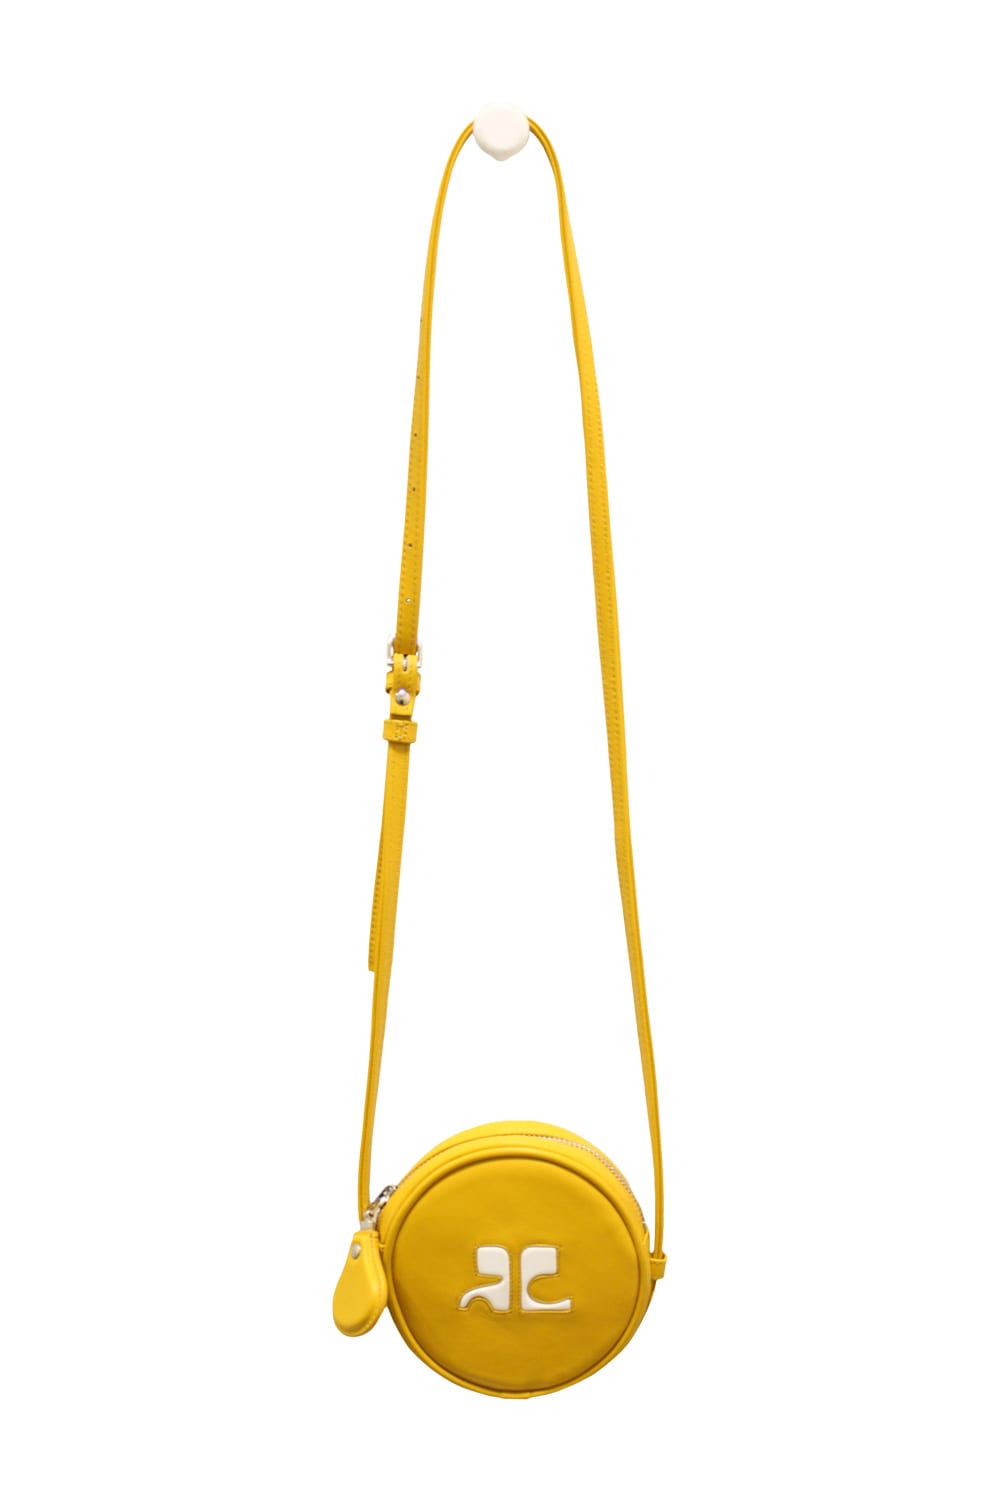 Courrèges Small Circle Bag In Yellow & Orange